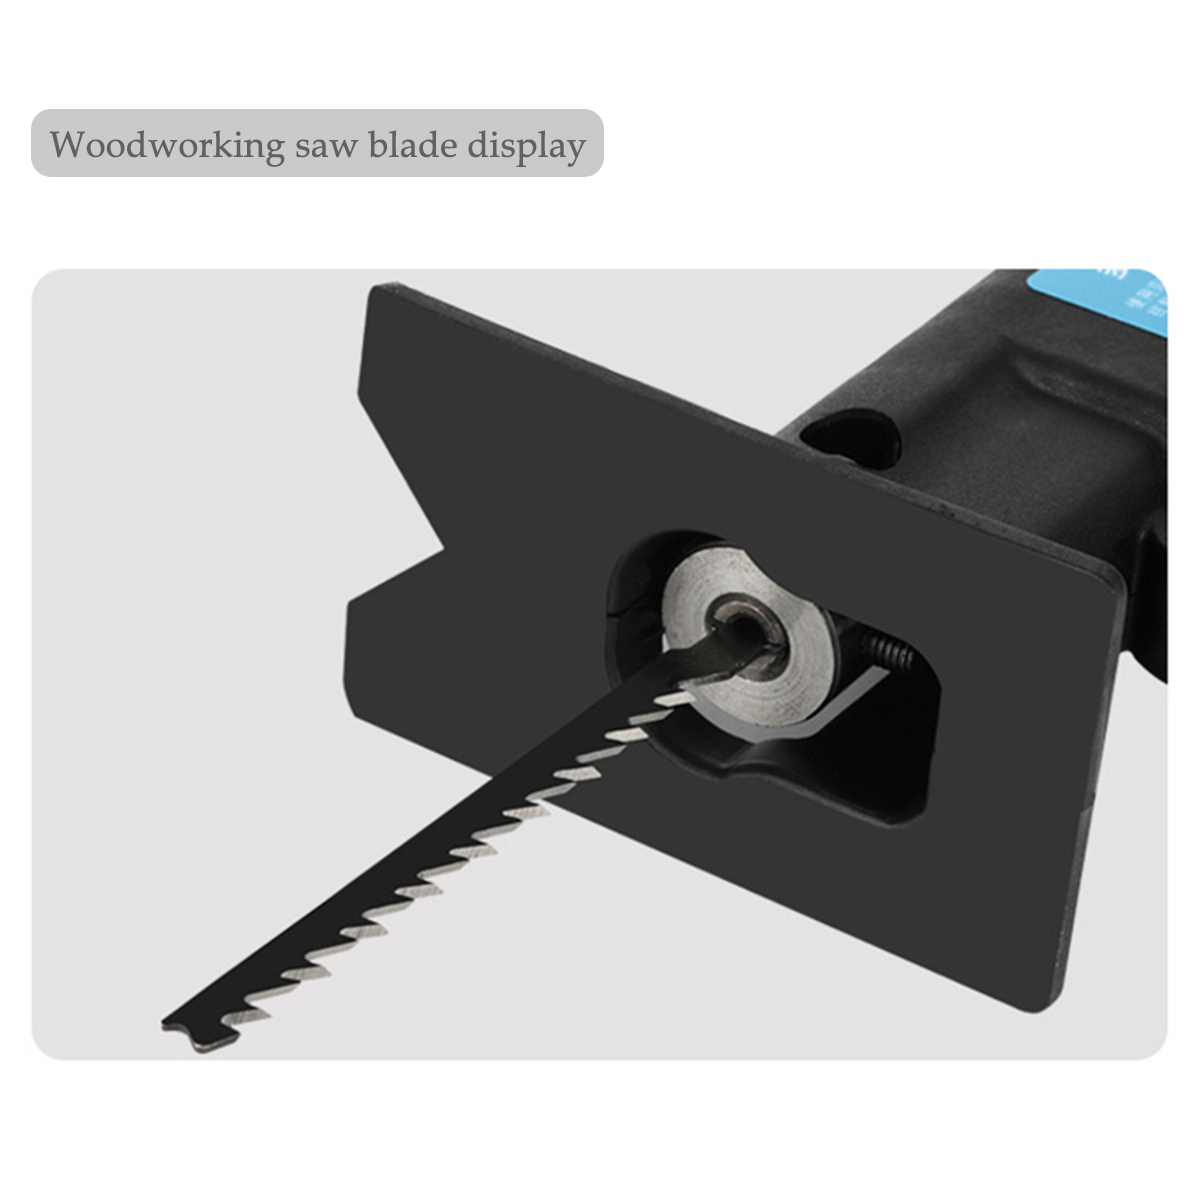 Reciprocating-Saw-Attachment-Adapter-Change-Electric-Drill-Into-Reciprocating-Saw-Jig-Saw-Woodworkin-1793120-10